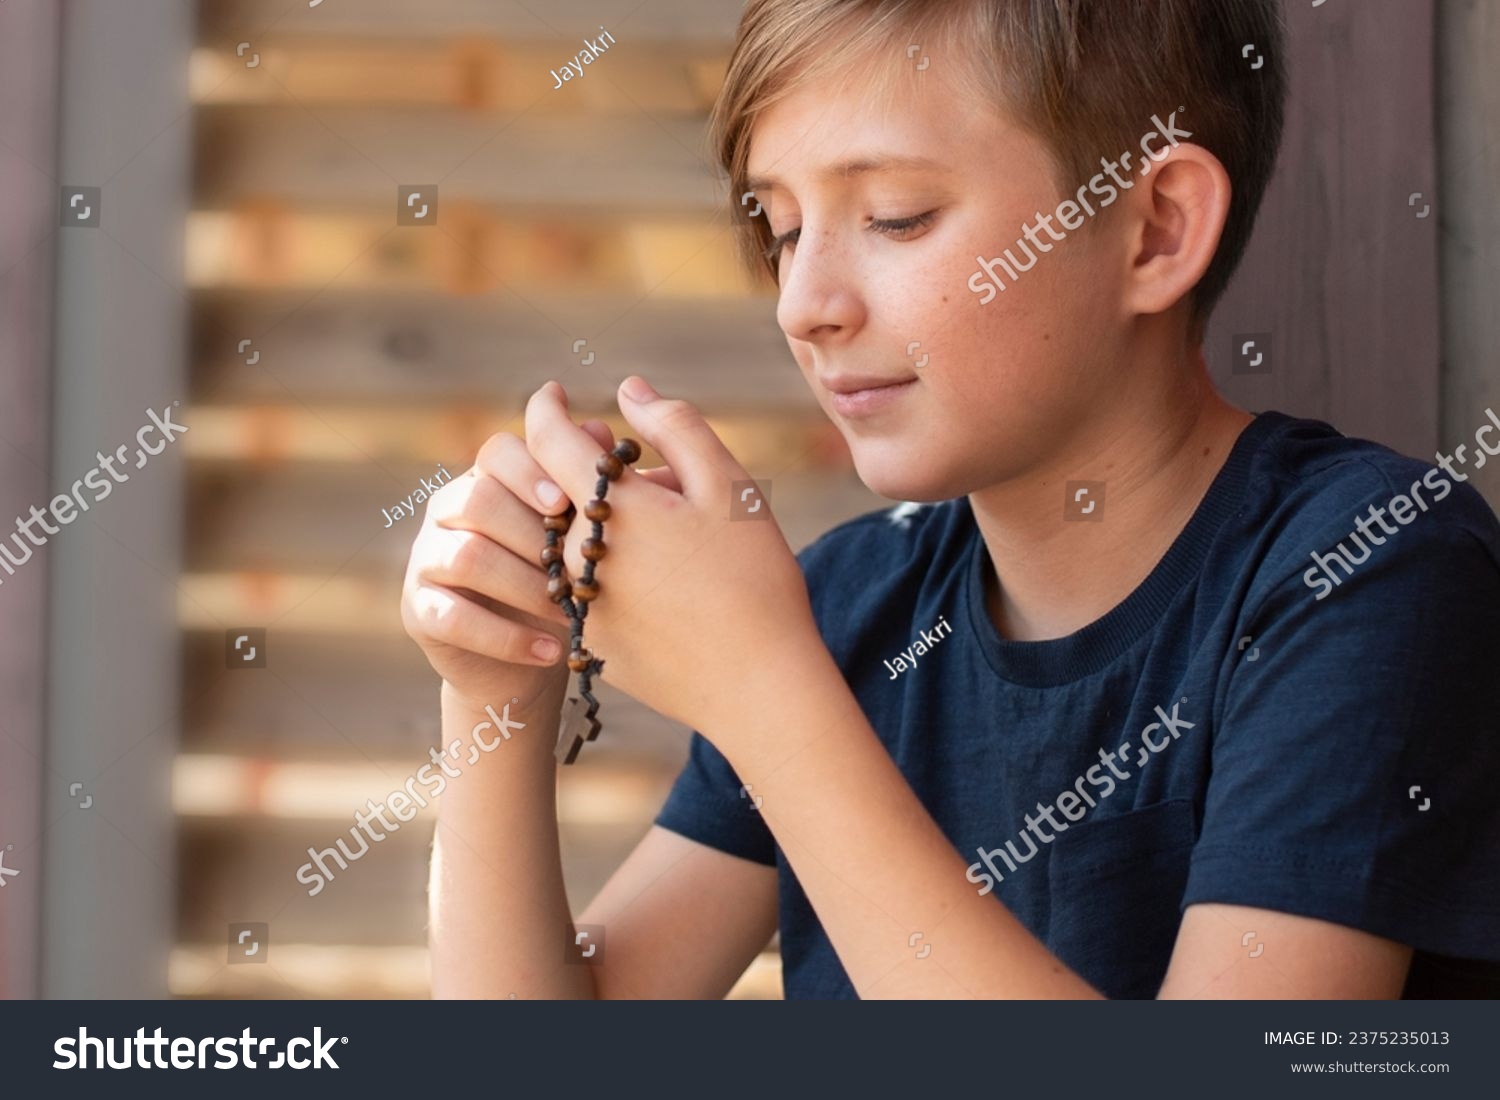 An 11 year old Catholic boy reads the rosary prayer, holds a wooden rosary with 10 beads in his hands. portrait of a boy with a wooden Catholic rosary during prayer. #2375235013